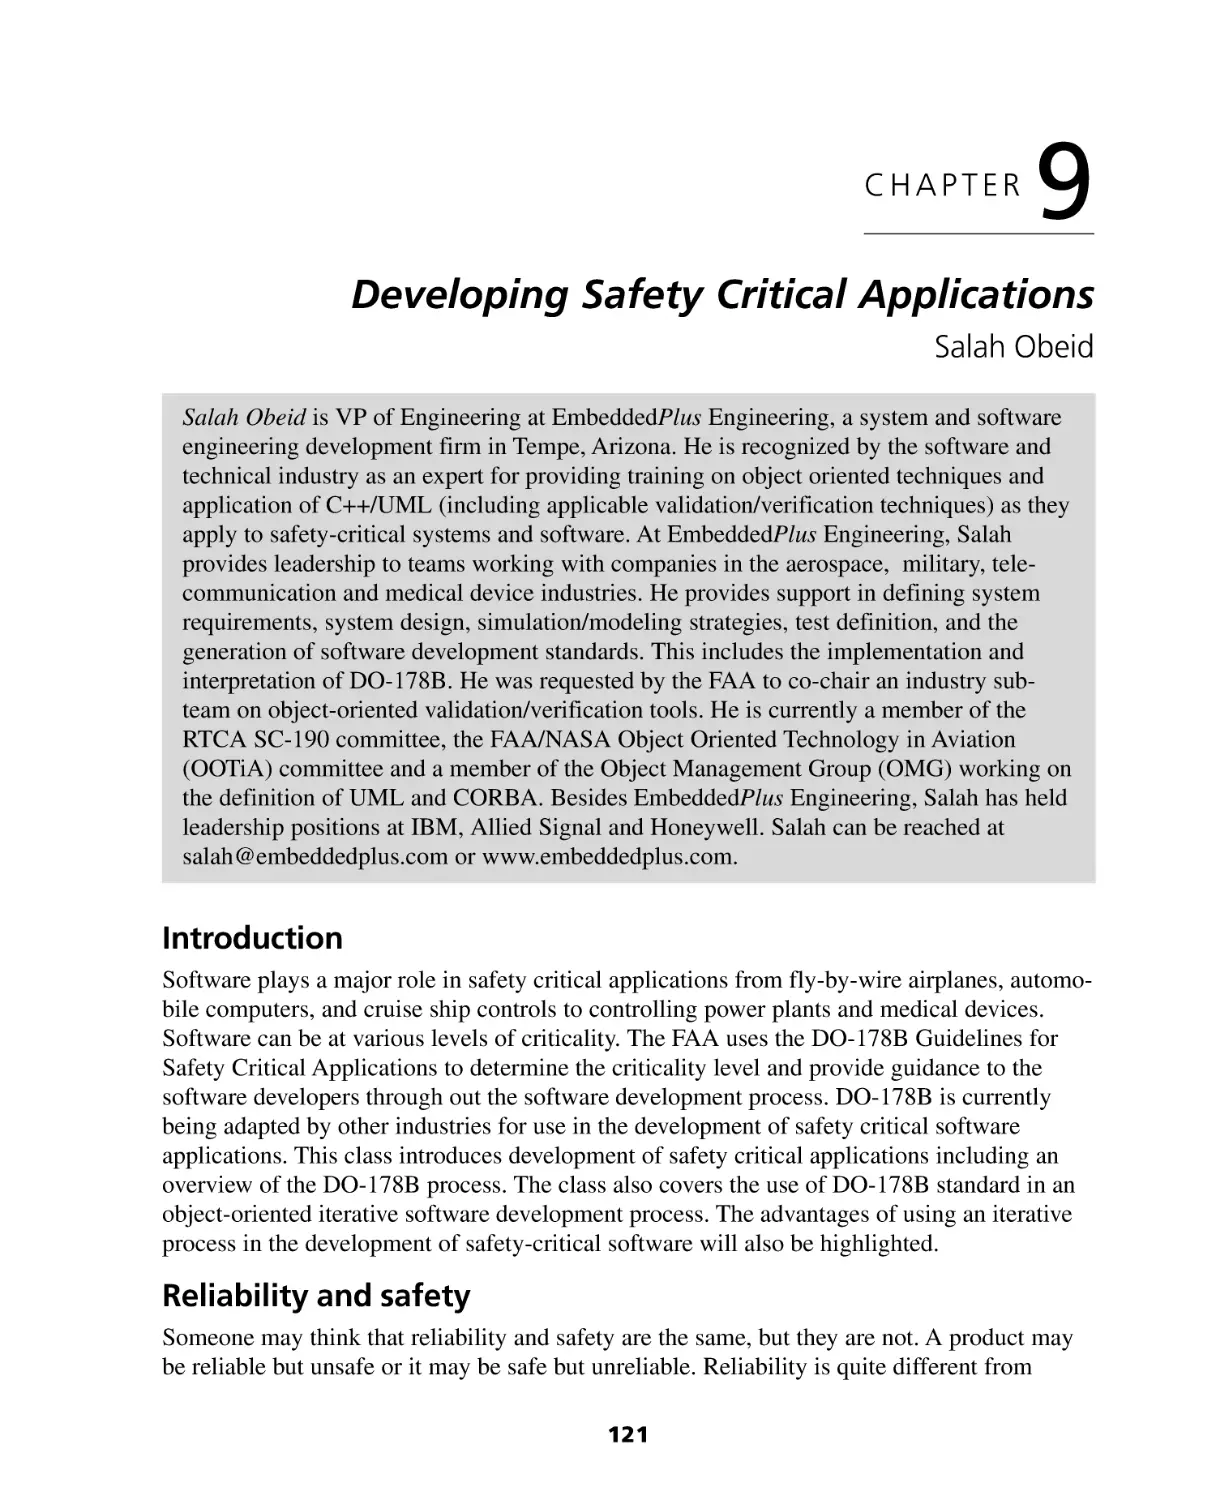 Chapter 9
Introduction
Reliability and safety